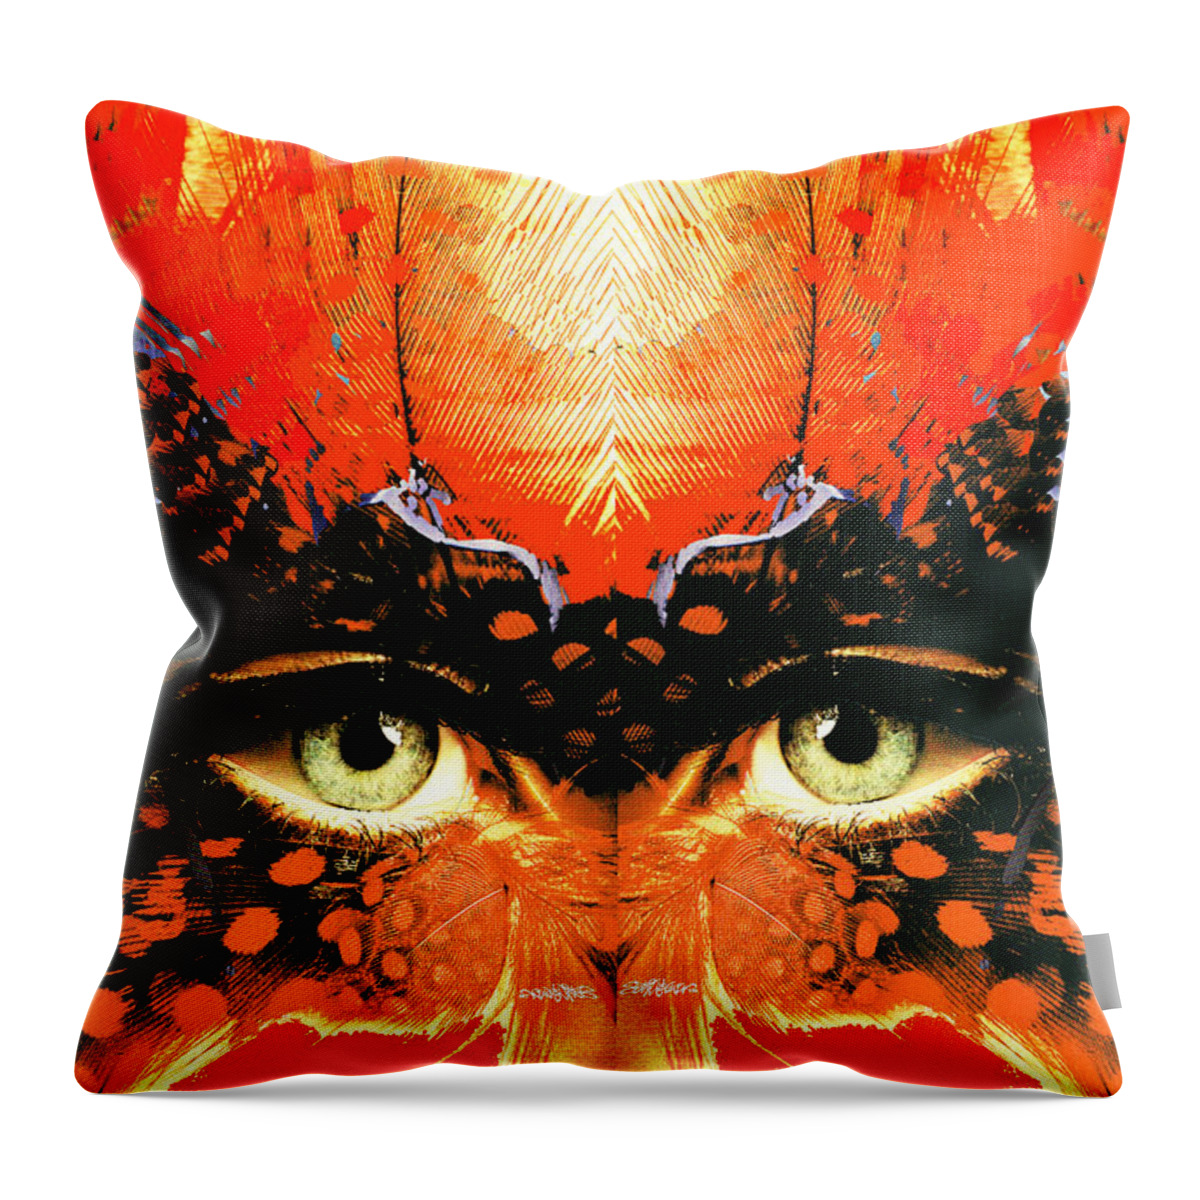 I'm Looking Through You Throw Pillow featuring the digital art I'm Looking Through You by Seth Weaver